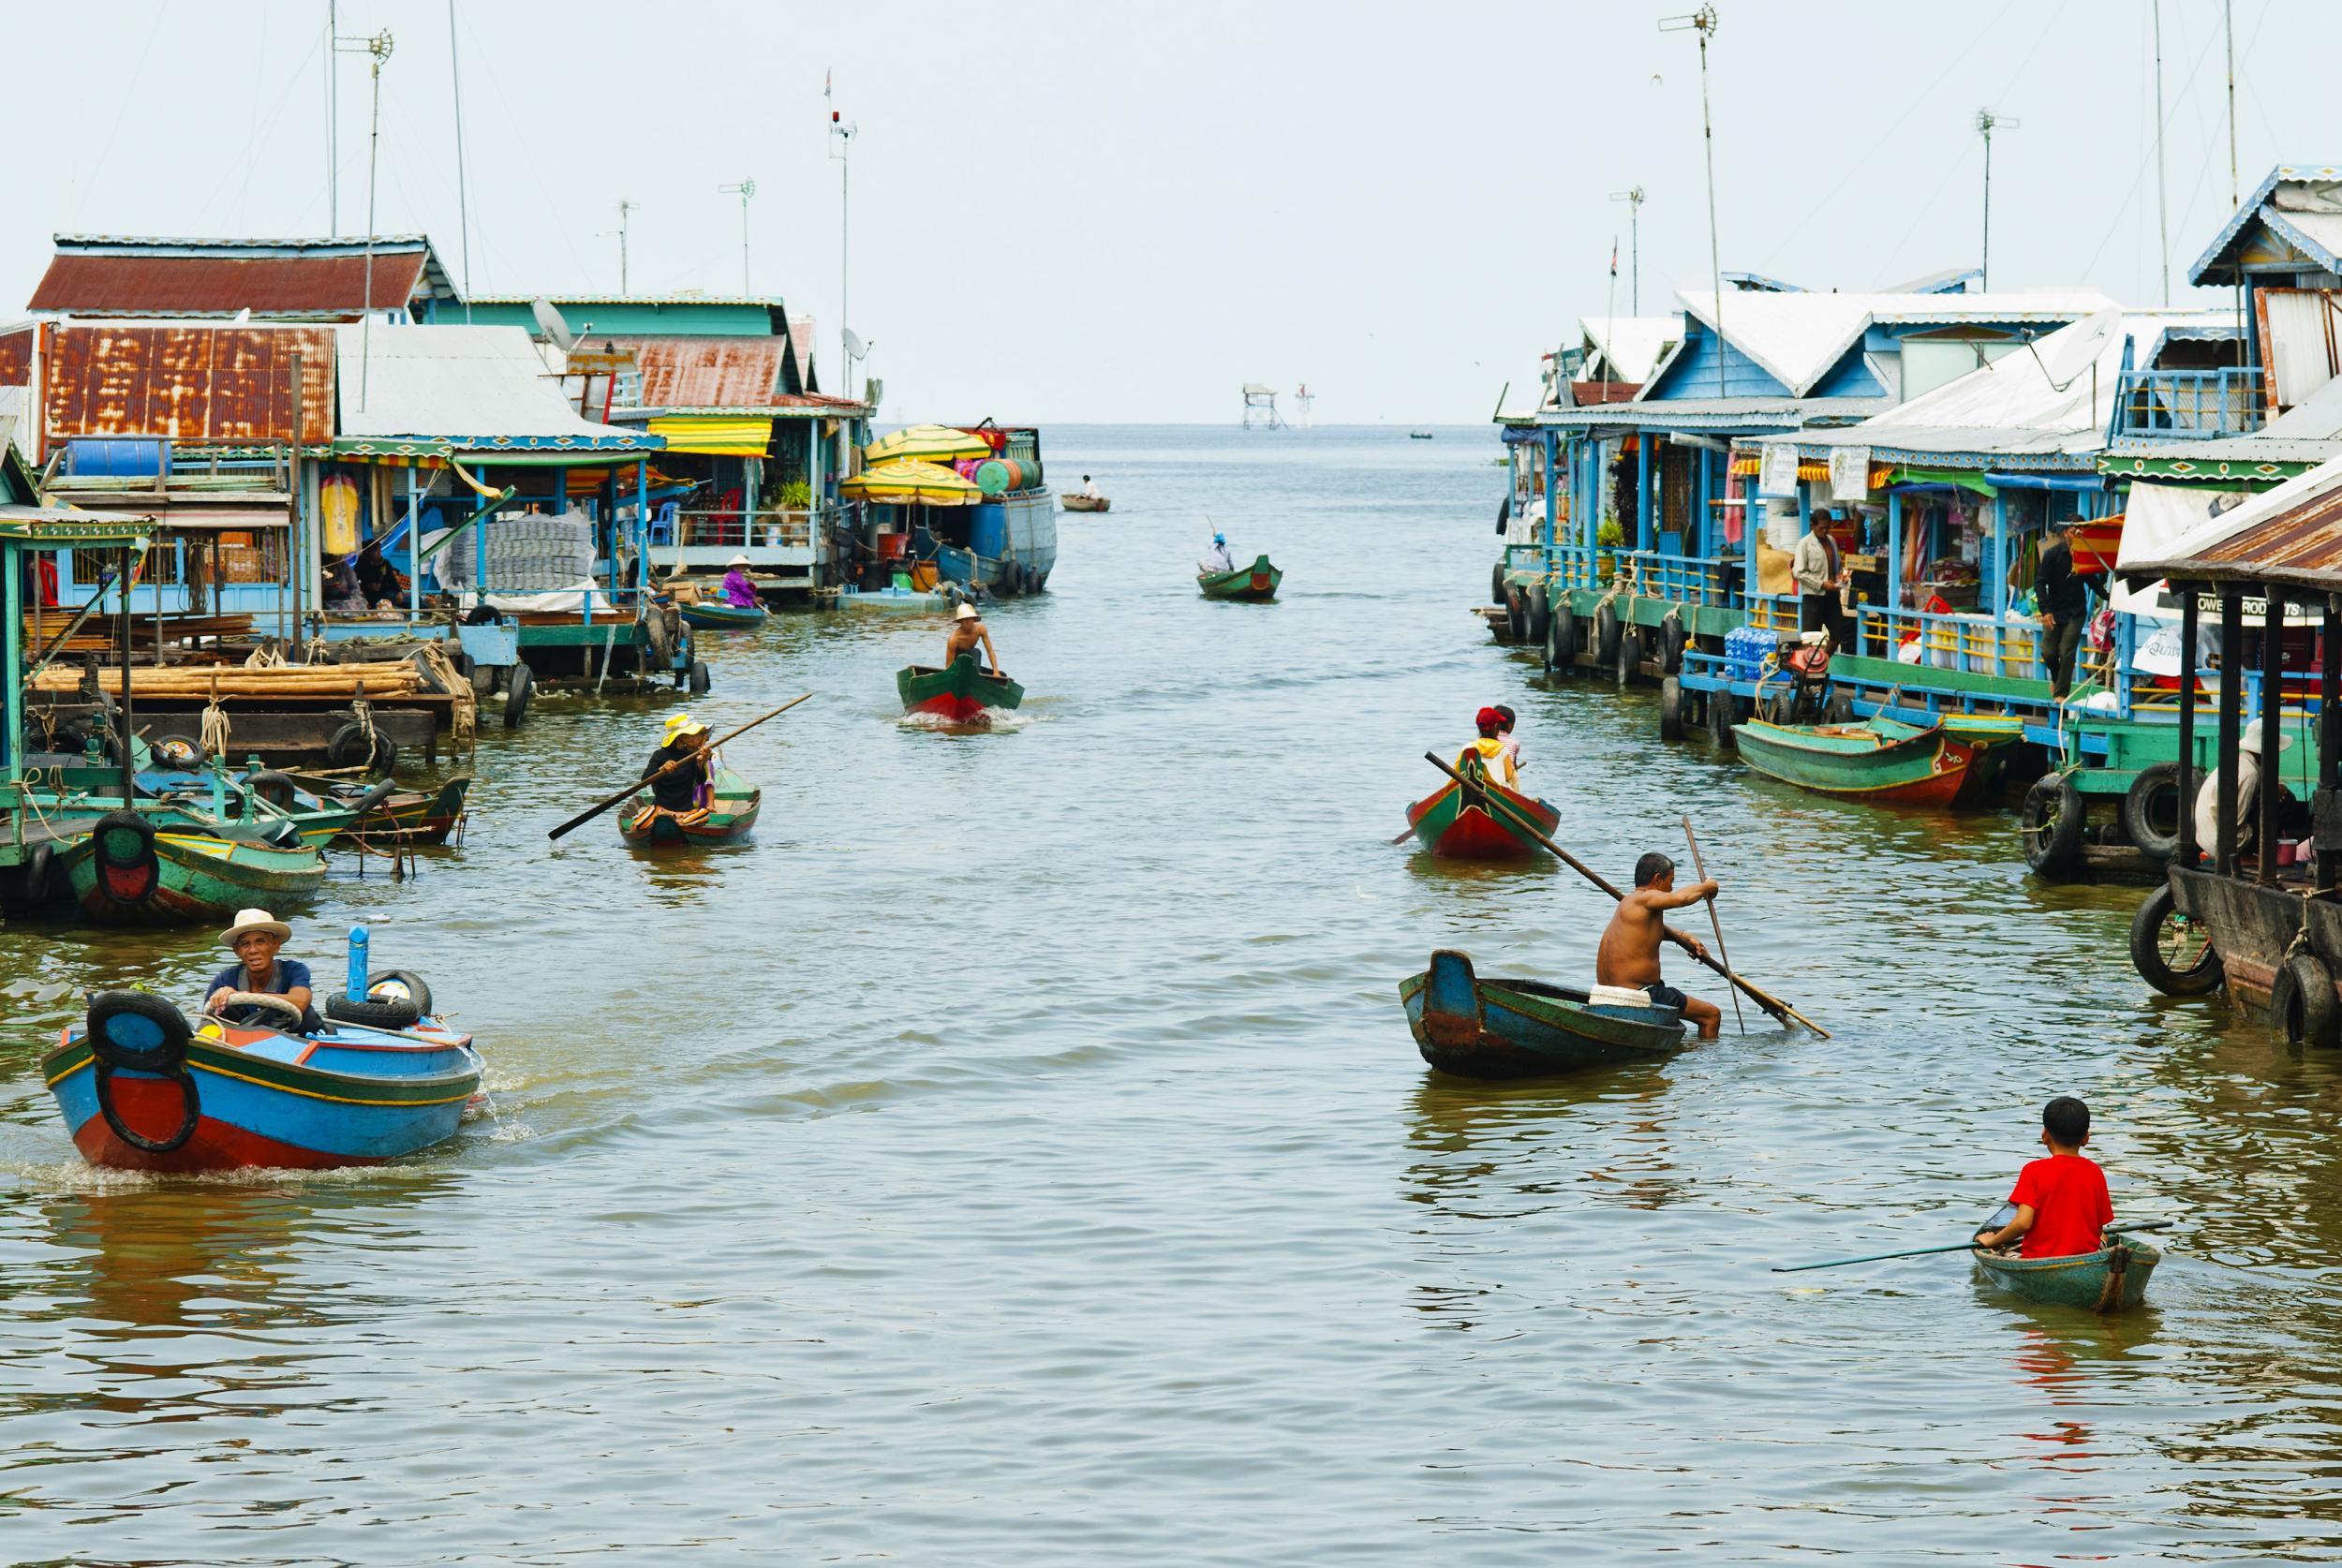 The Mekong is becoming increasingly popular for cruises